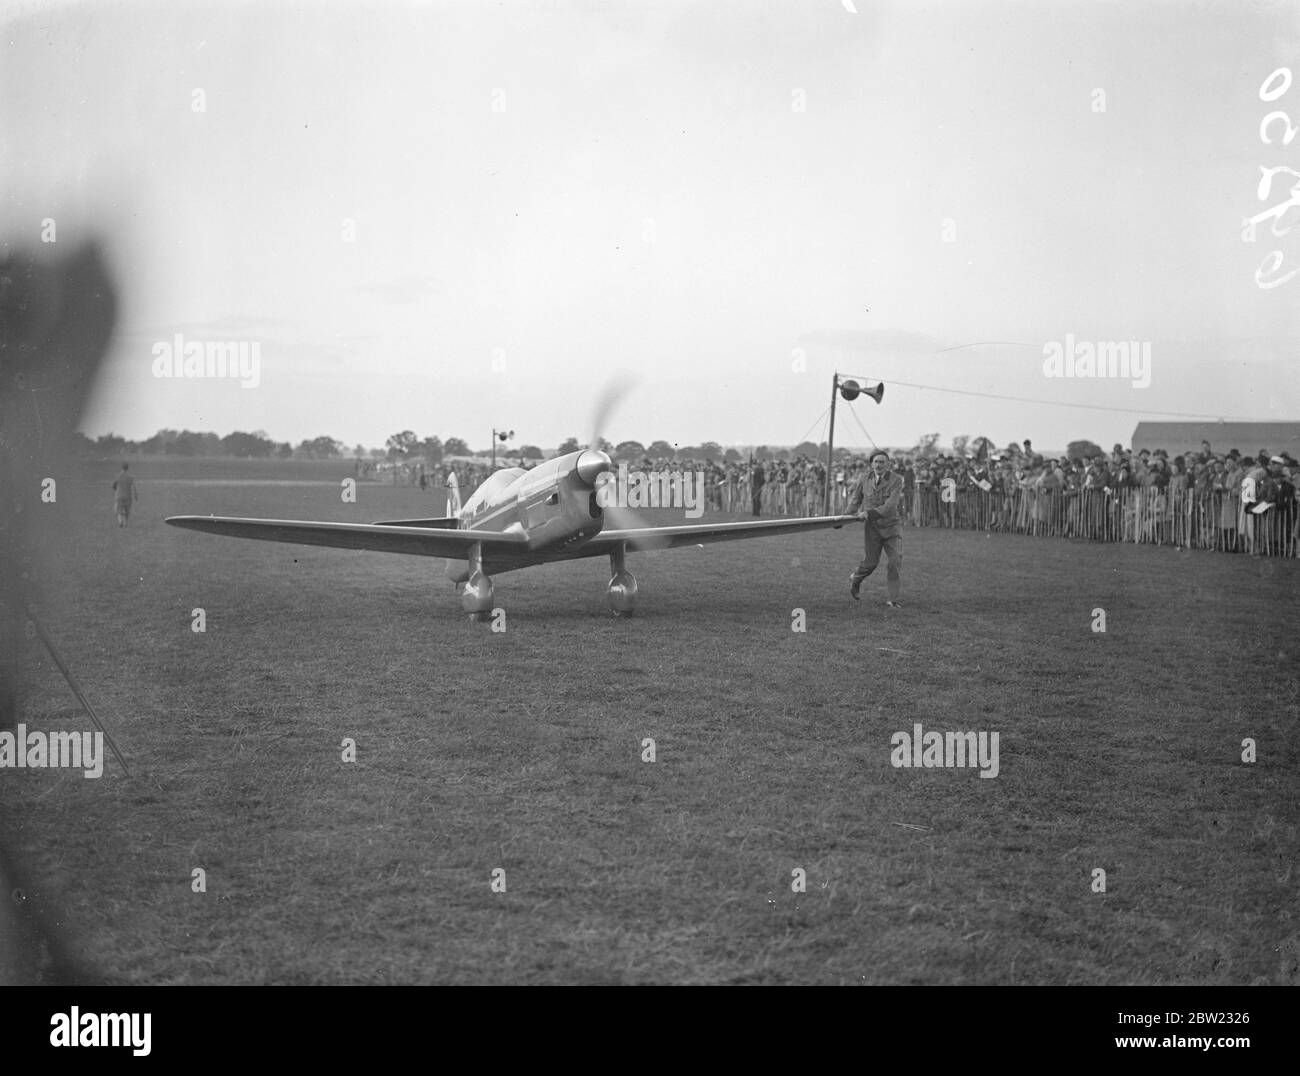 C.E Gardener's plane landing at the aerodrome at the finishing point. He was flying a percival Mew Gull, at the King's cup air race for the second year in succession. Second with 63-year-old brigadier general A.C Lewin who bought his Milea whitney machine all the way from Kenya to compete. 11 September 1937. Stock Photo